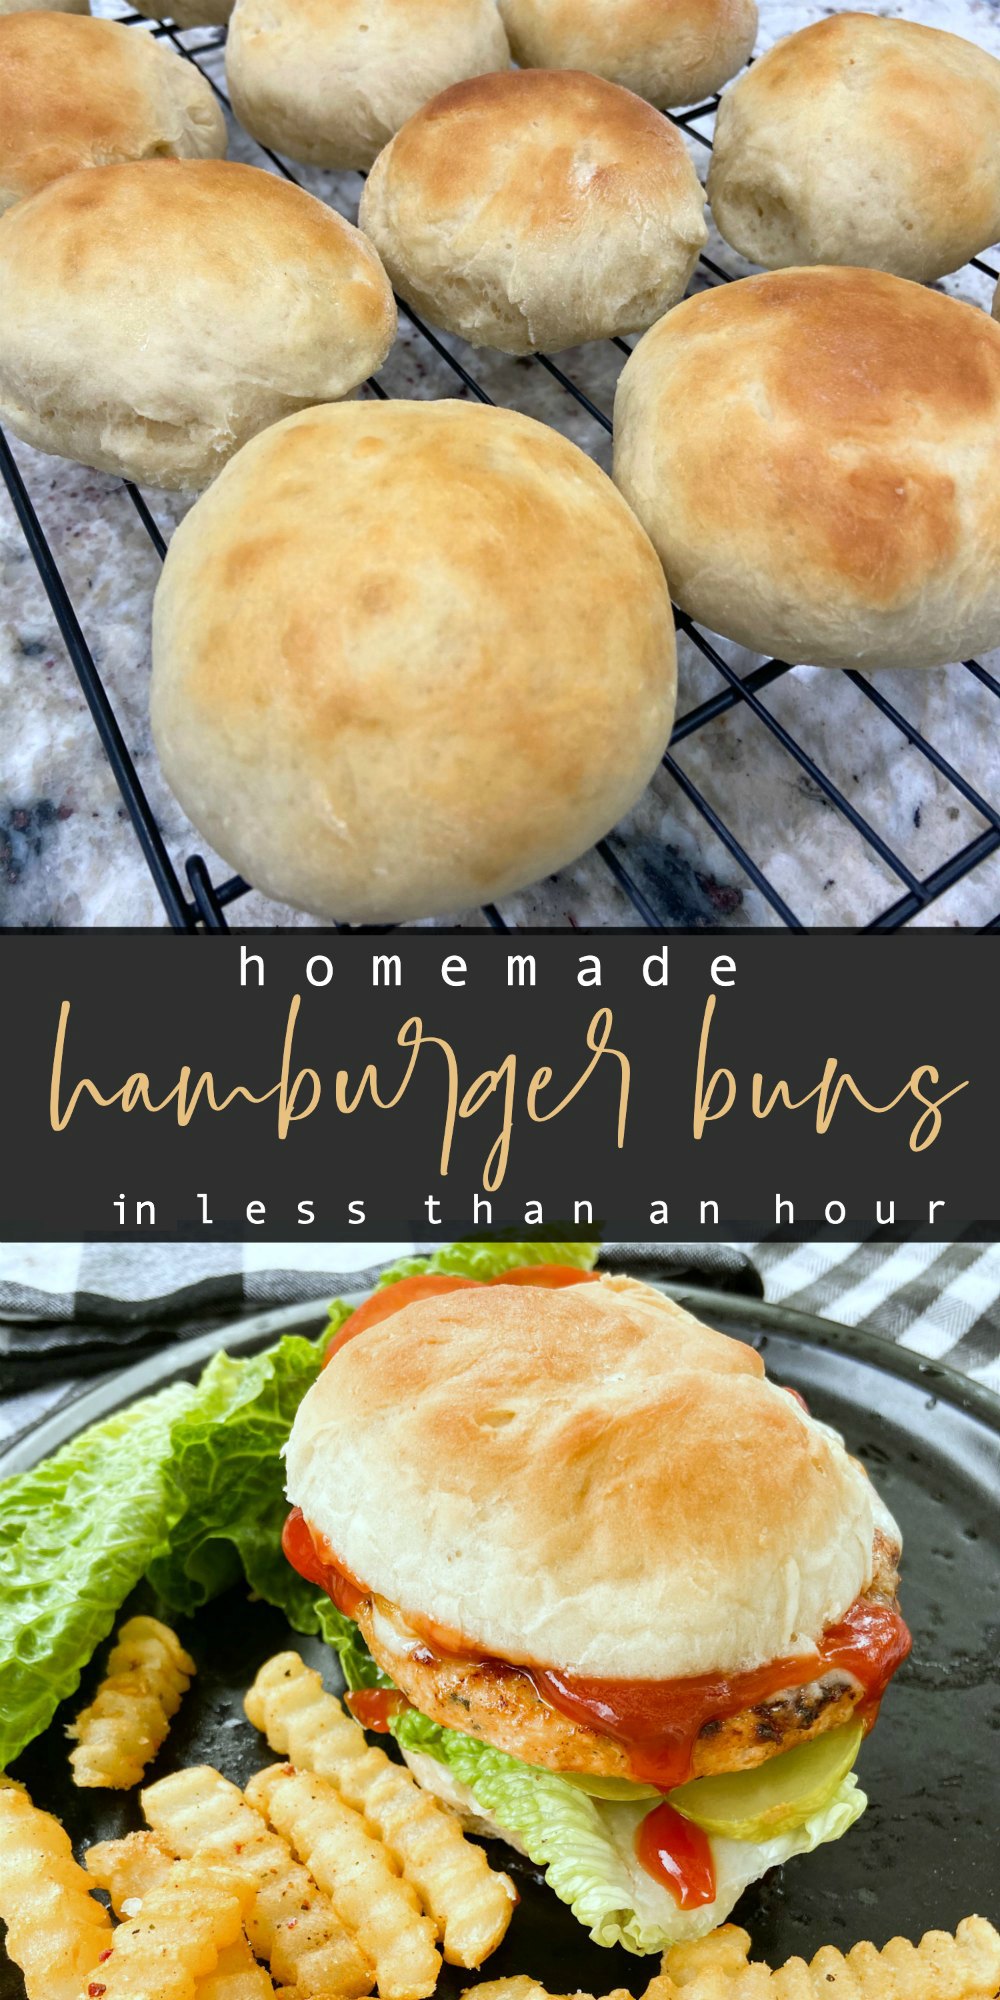 Fast and Easy Homemade Hamburger Buns in Less Than an Hour. Need a quick hamburger bun without having to run to the store? These are easy to make and bake up fluffy and golden brown in less than an hour.